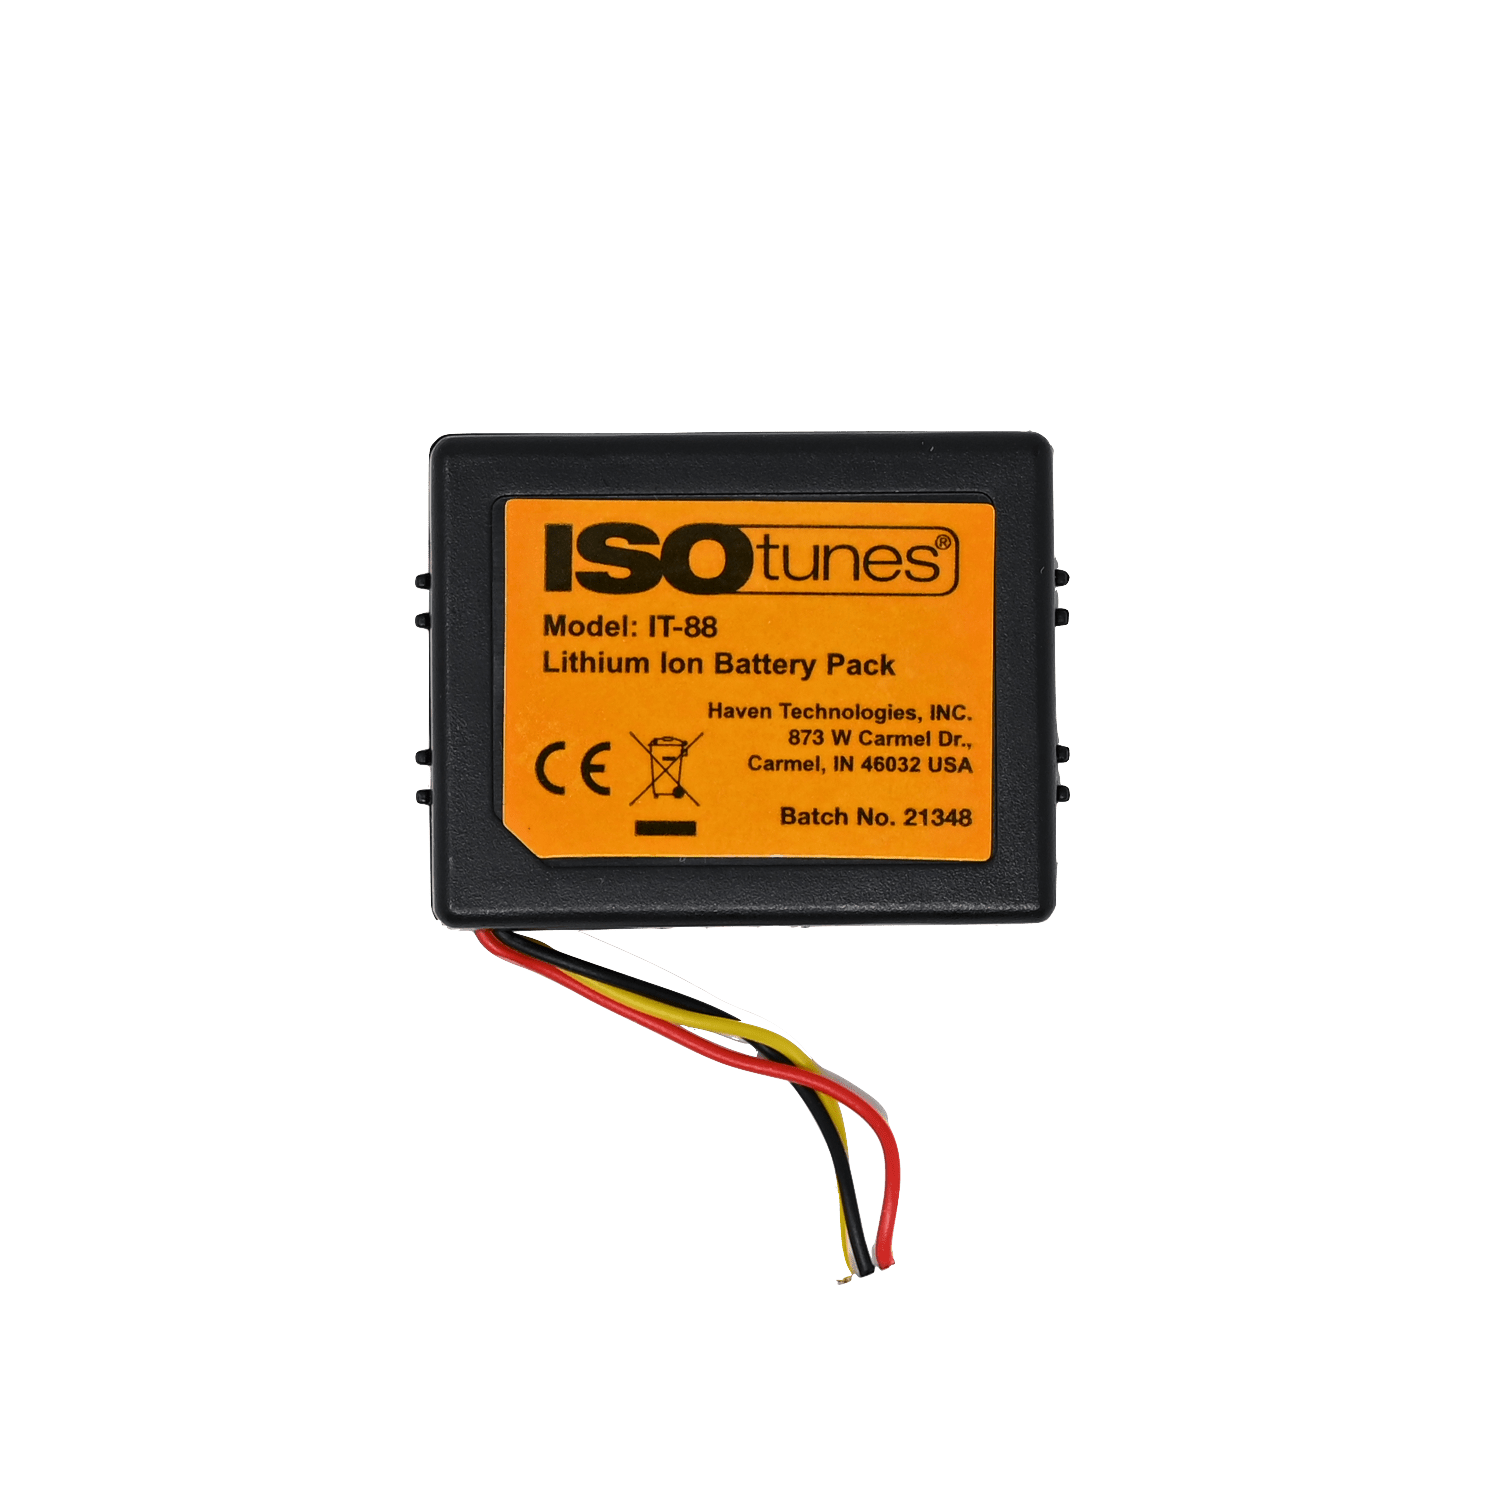 Replacement Lithium Battery 2.0 - EU ISOtunes